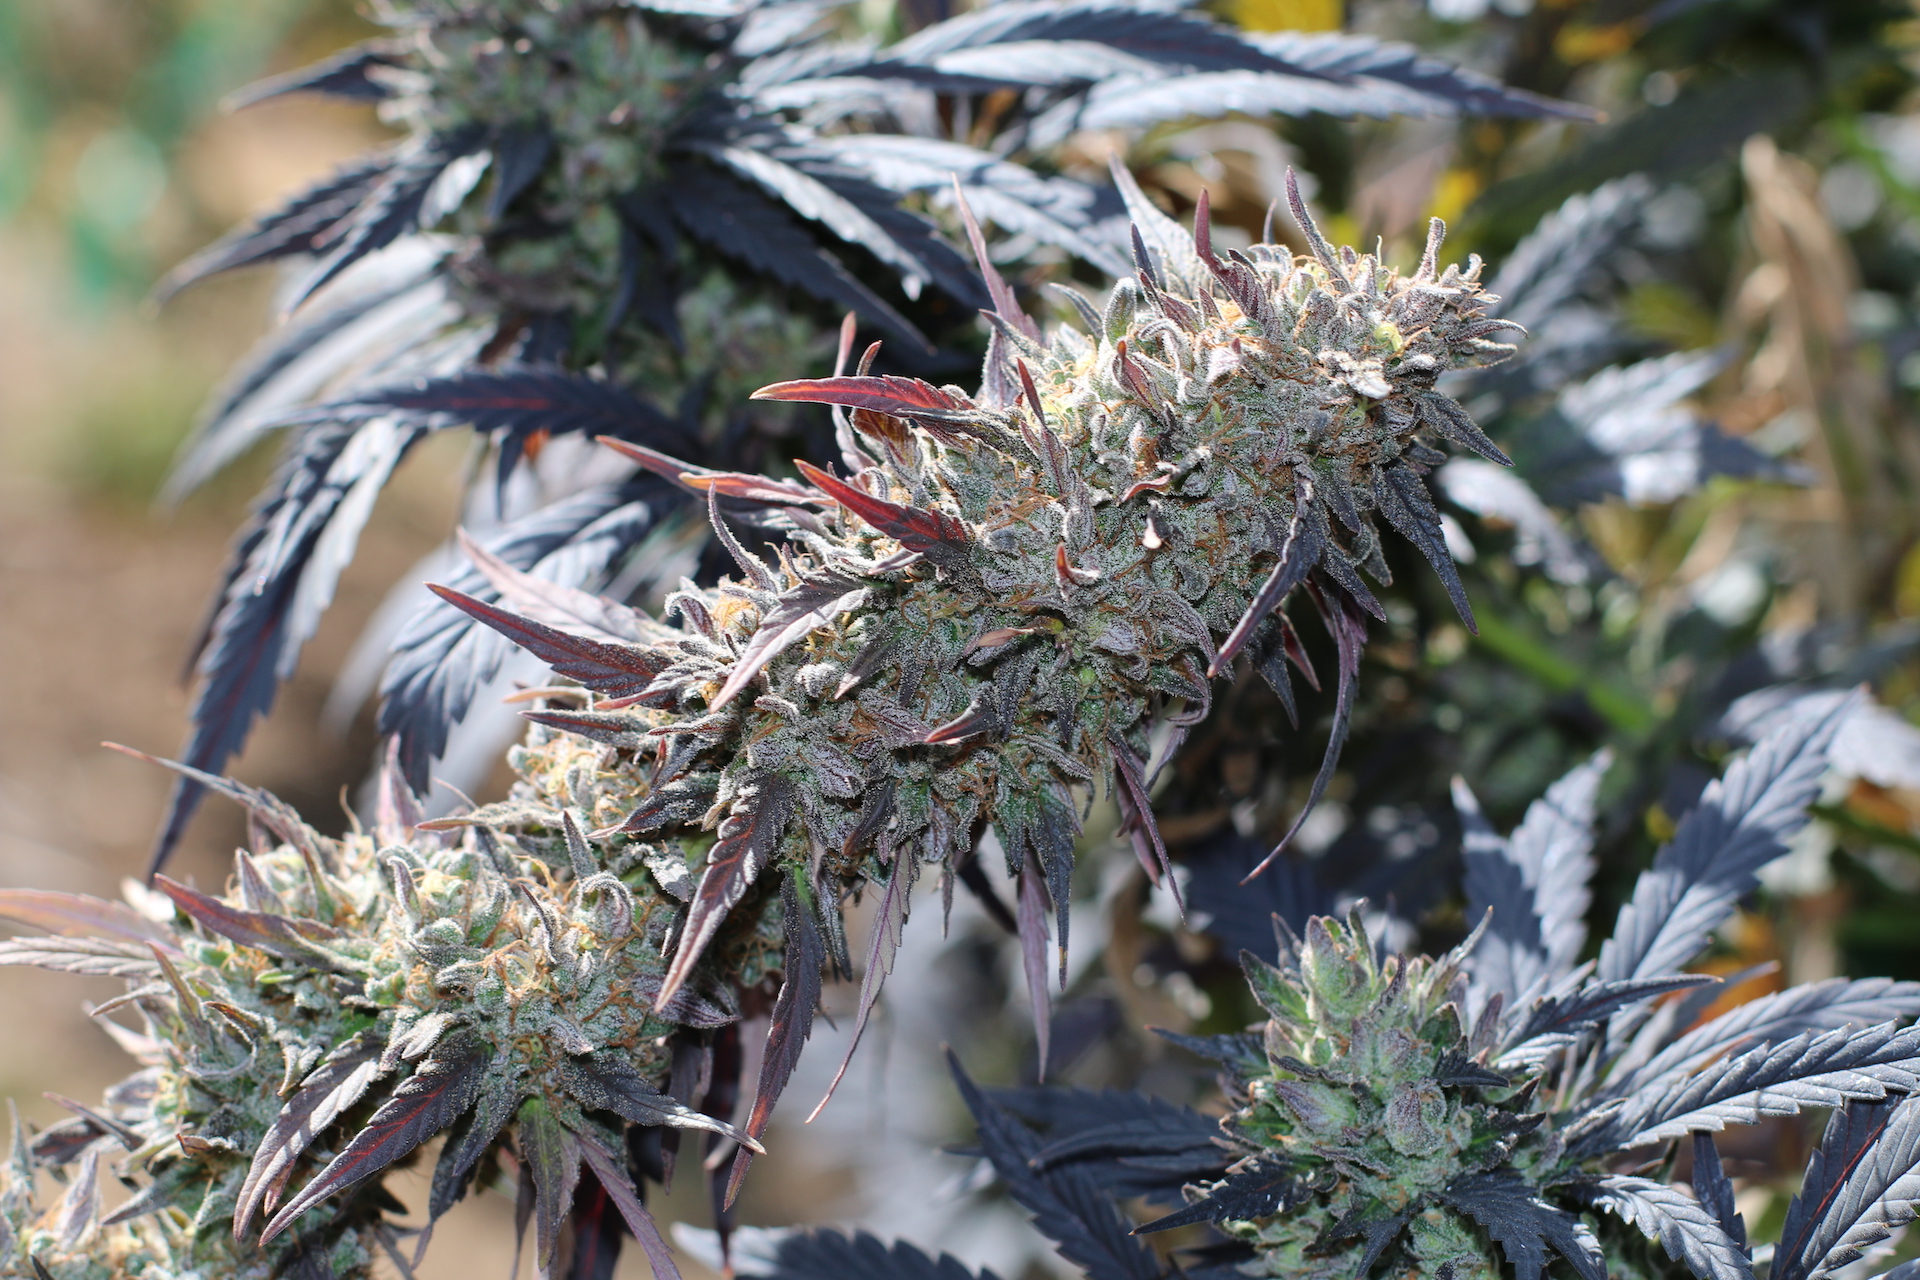 10 badass sustainable cannabis flowers, joints, hash, and more